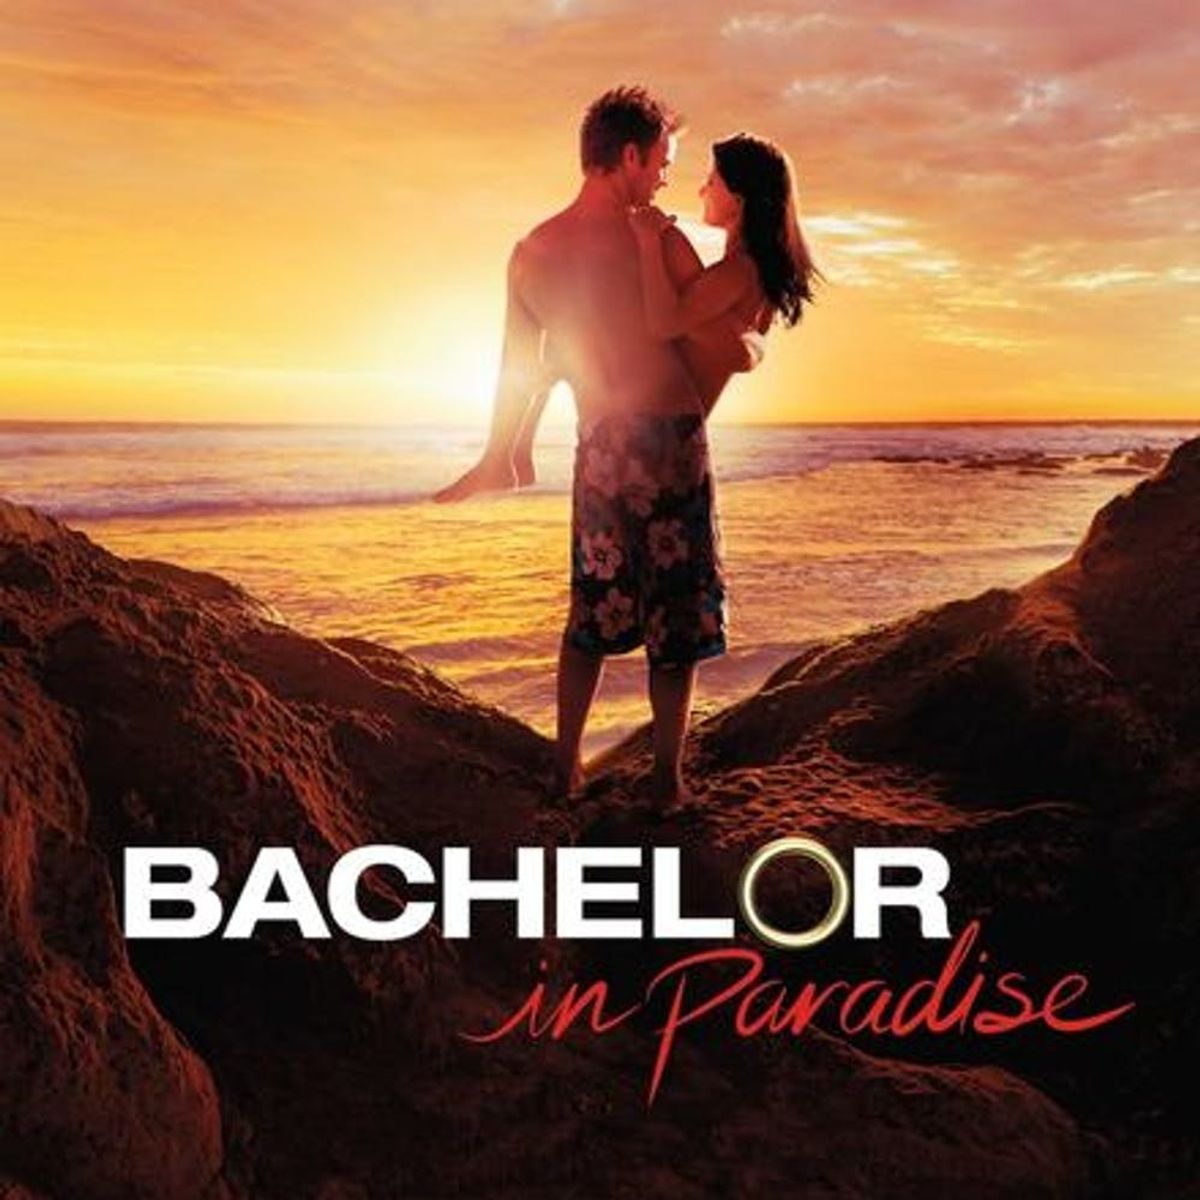 Bachelor in Paradise to Resume Filming After Misconduct Investigation